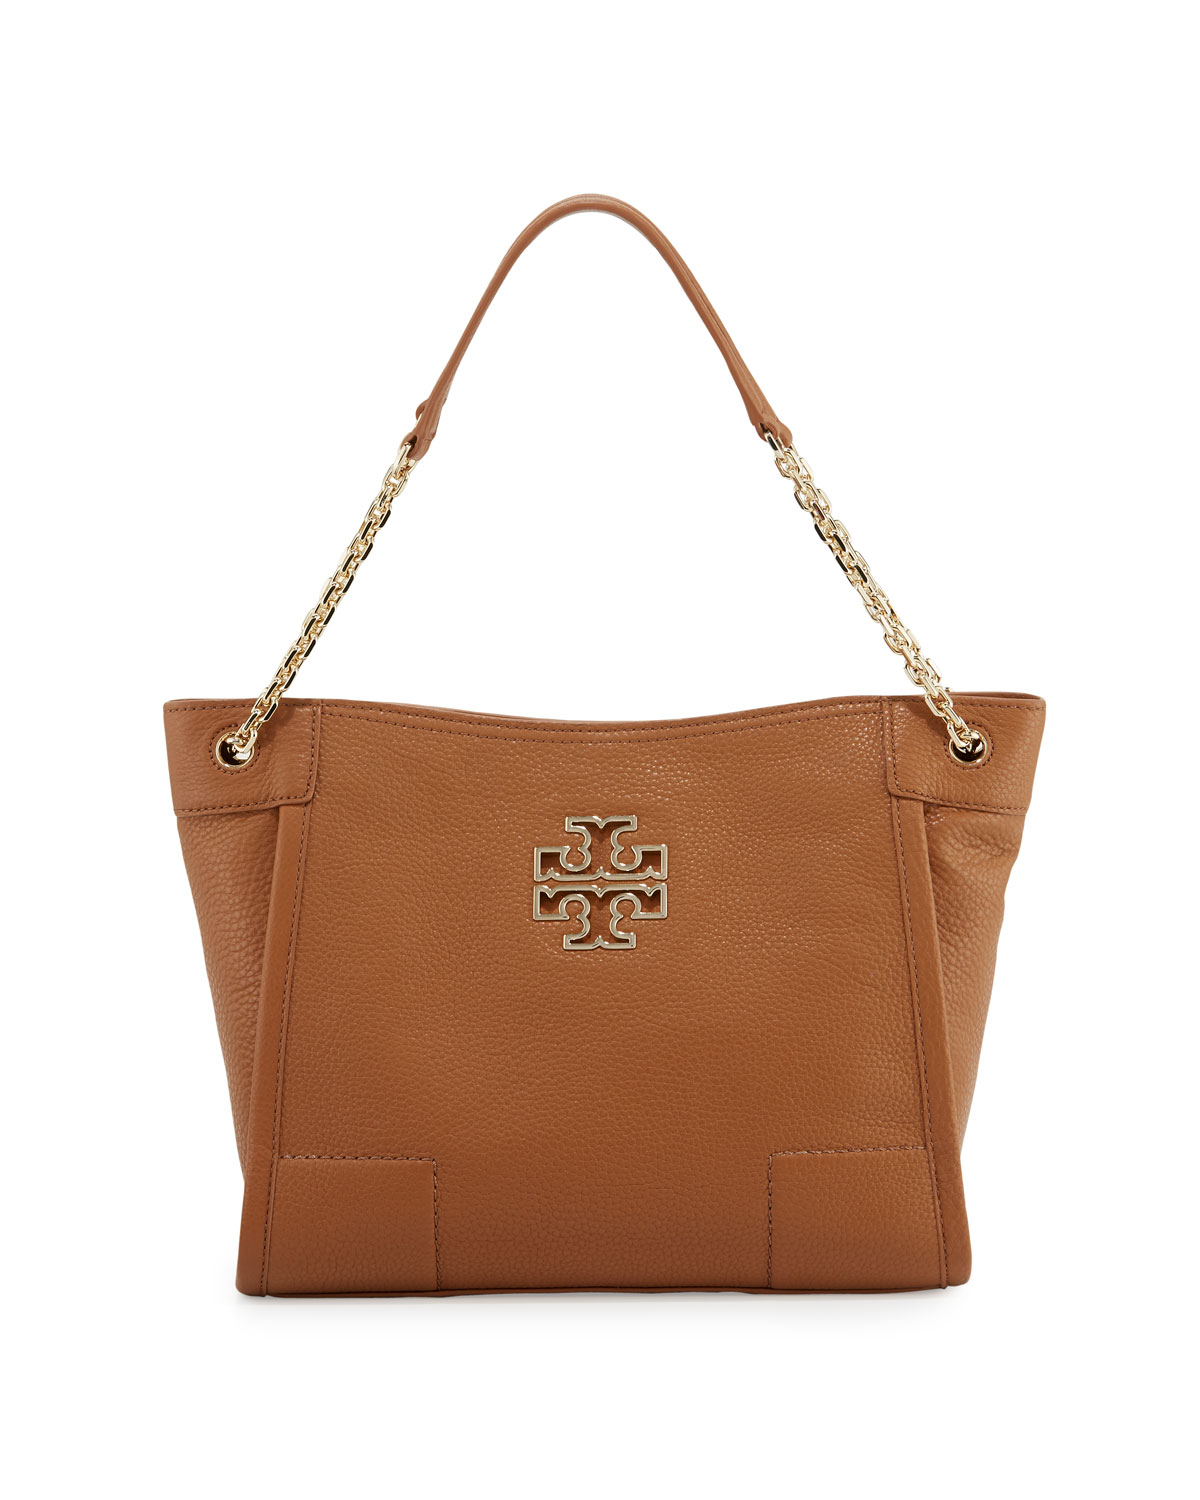 Lyst - Tory Burch Britten Small Leather Tote Bag in Brown